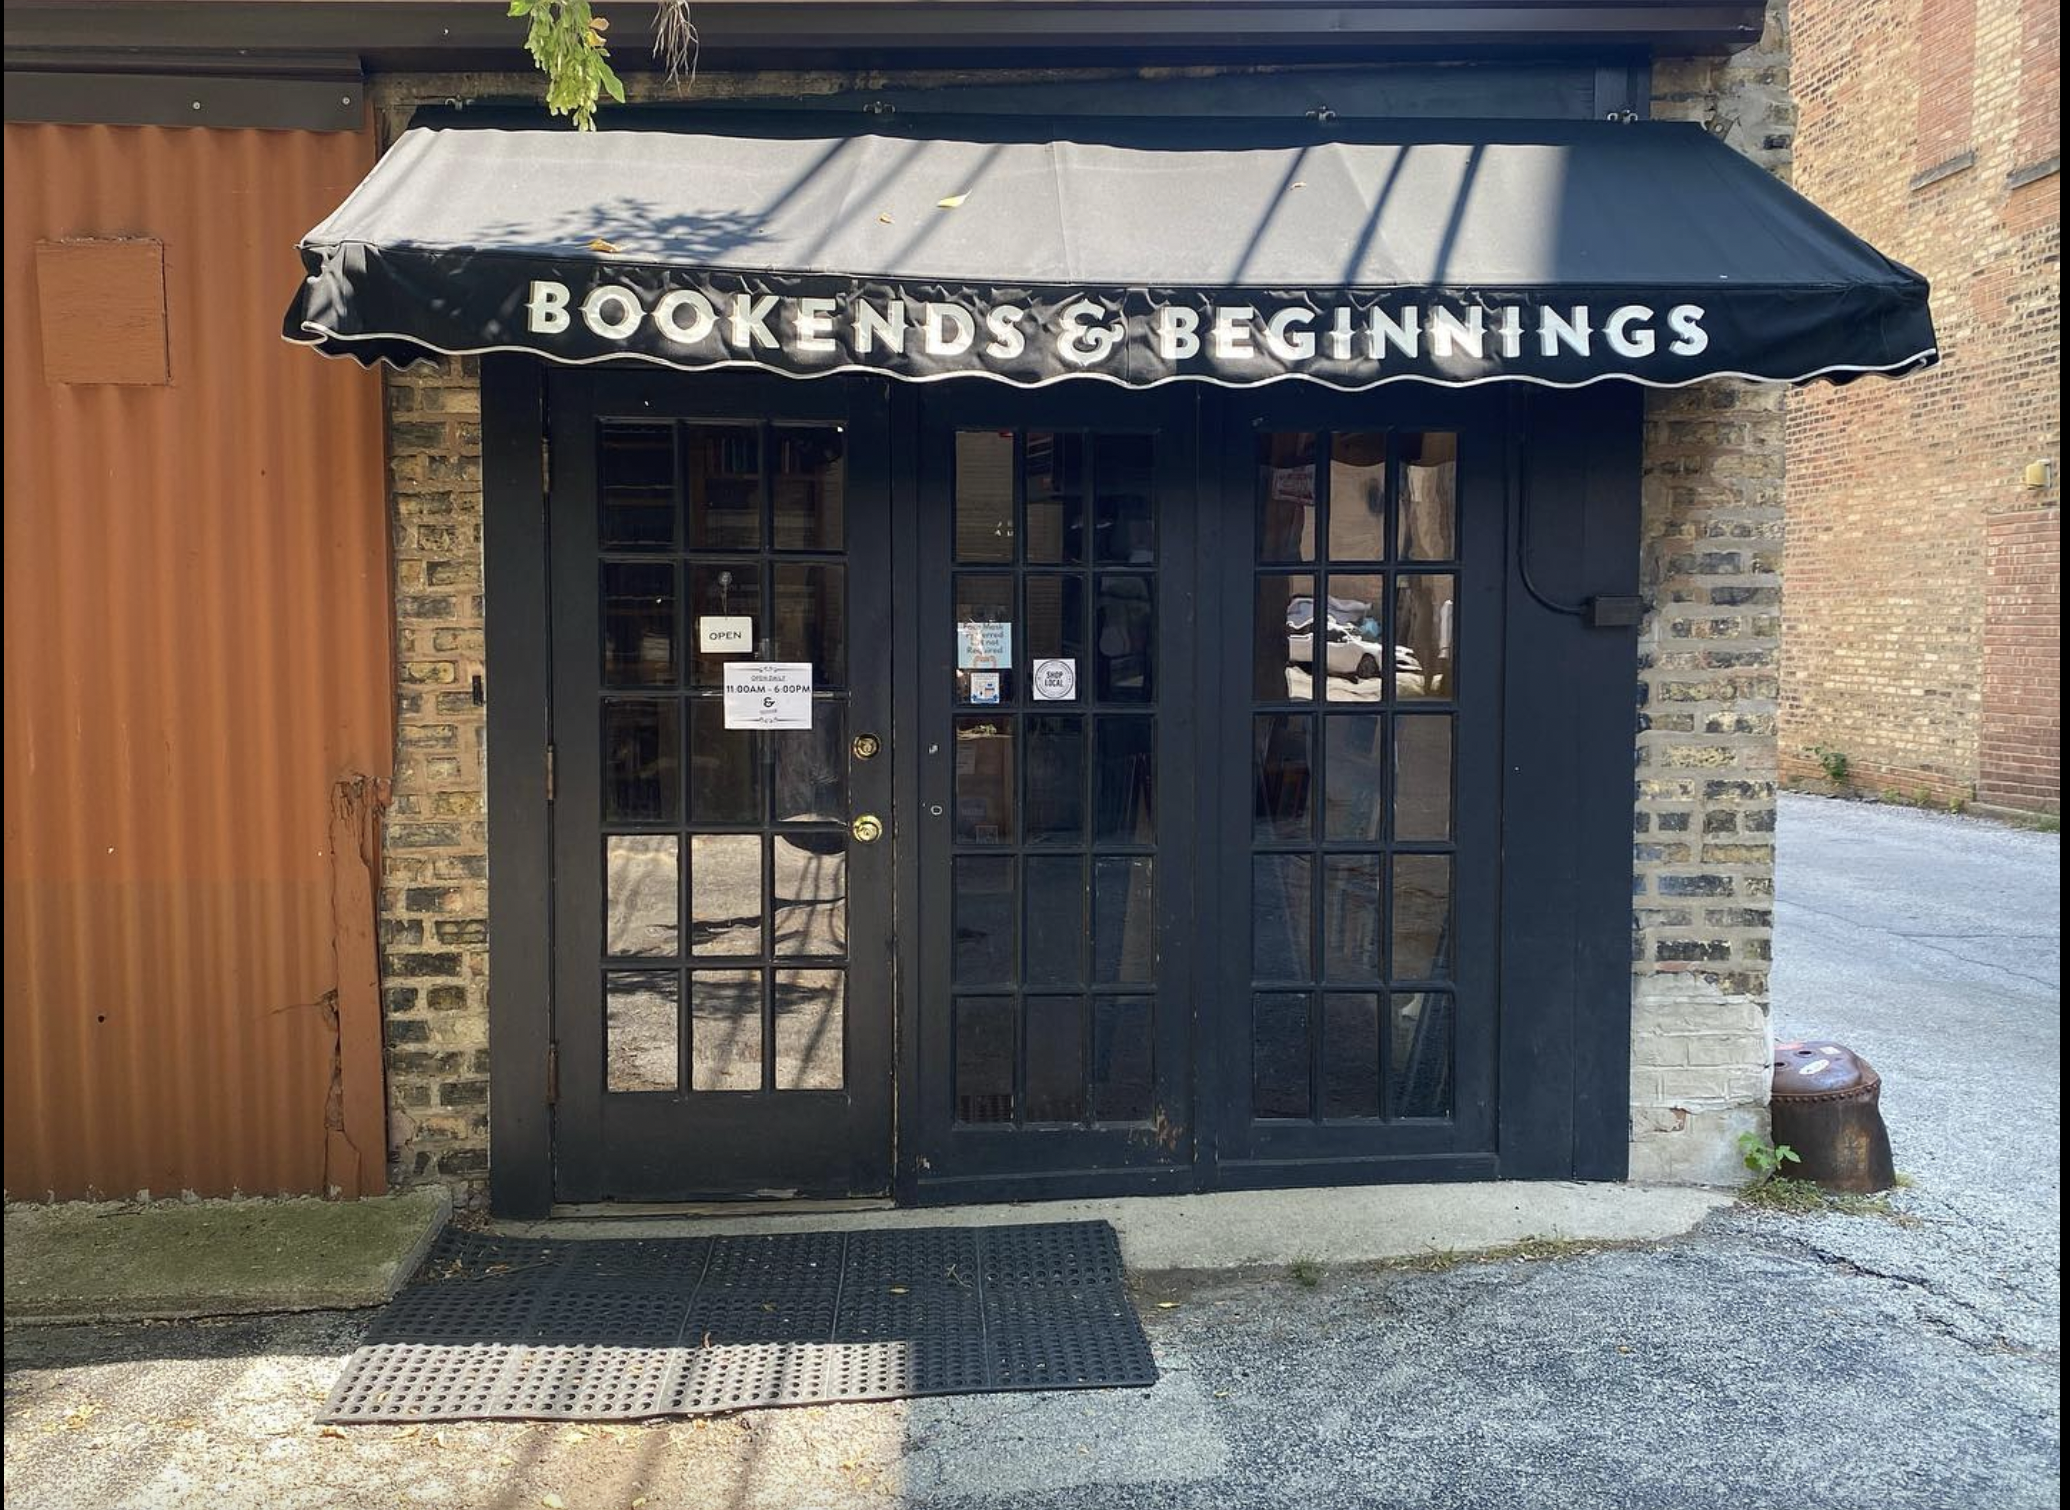 Bookends & Beginnings Launches Fundraising Campaign